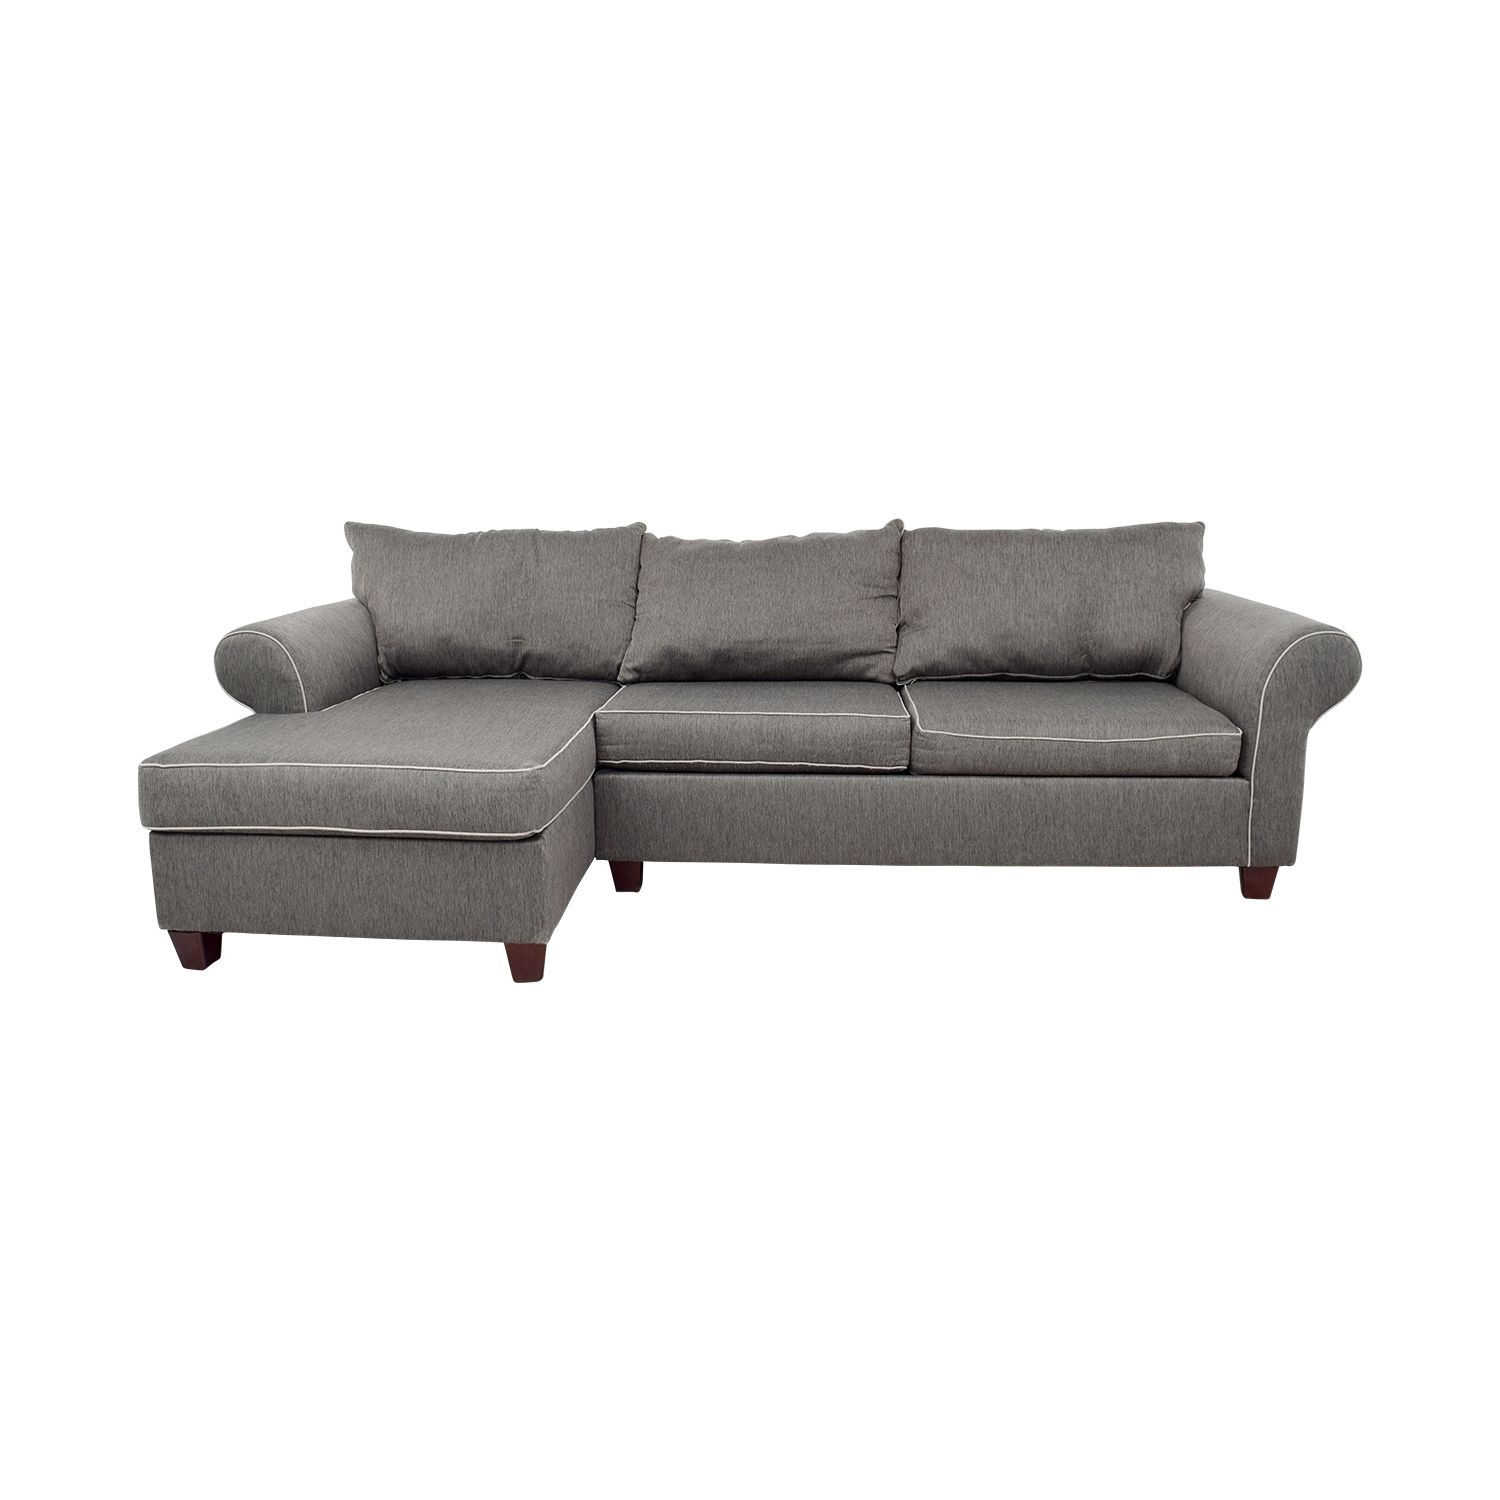 [%58% Off – Bob's Furniture Bob's Furniture Grey Chaise Sectional Throughout Recent Bobs Furniture Chaises|bobs Furniture Chaises Throughout Preferred 58% Off – Bob's Furniture Bob's Furniture Grey Chaise Sectional|most Current Bobs Furniture Chaises With Regard To 58% Off – Bob's Furniture Bob's Furniture Grey Chaise Sectional|well Known 58% Off – Bob's Furniture Bob's Furniture Grey Chaise Sectional Within Bobs Furniture Chaises%] (View 6 of 15)